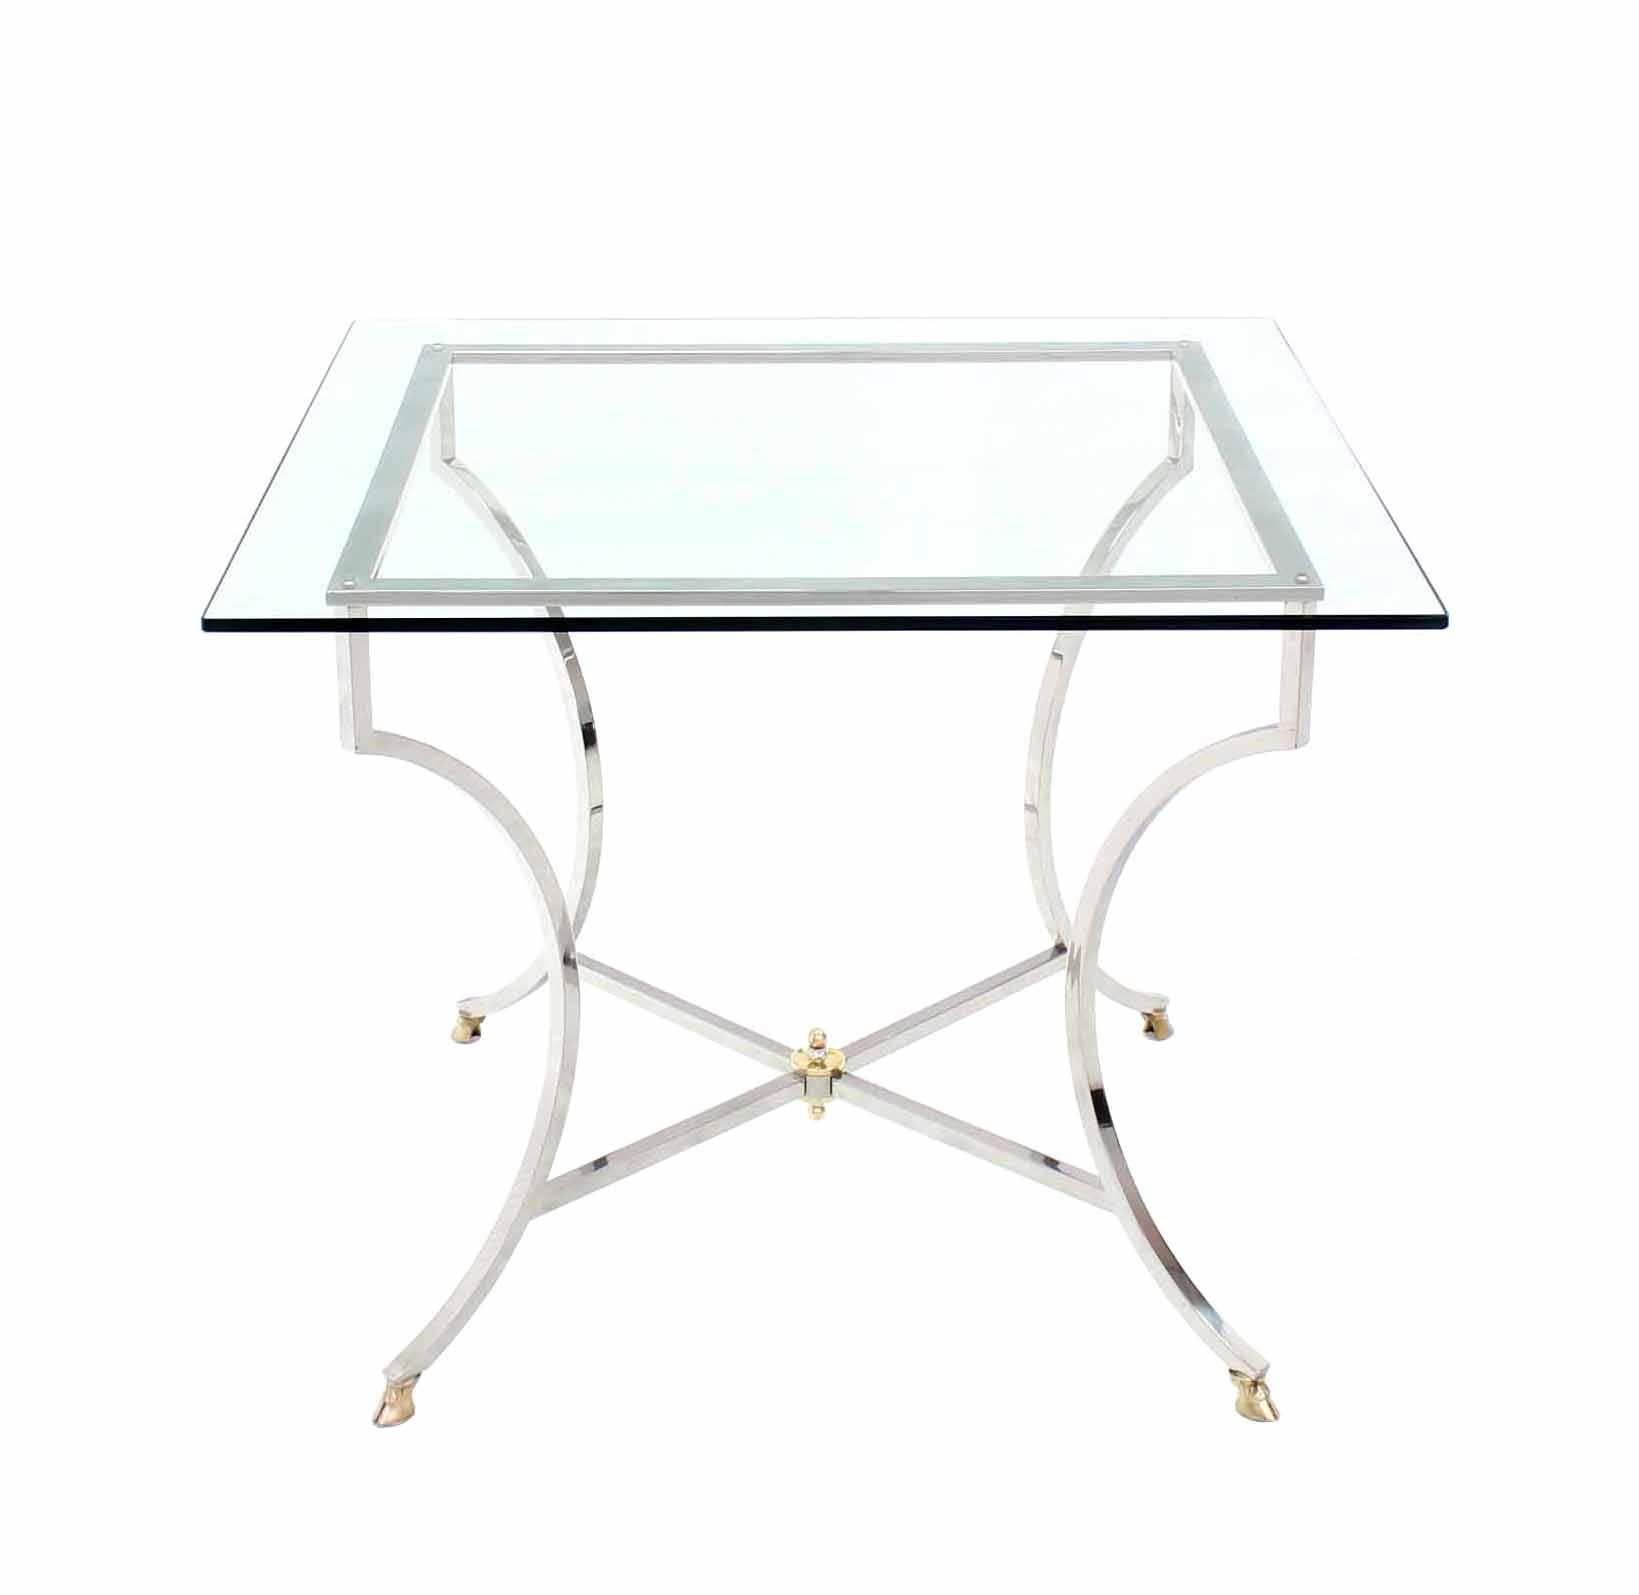 Brass hoof feet stainless steel base thick glass top game table.